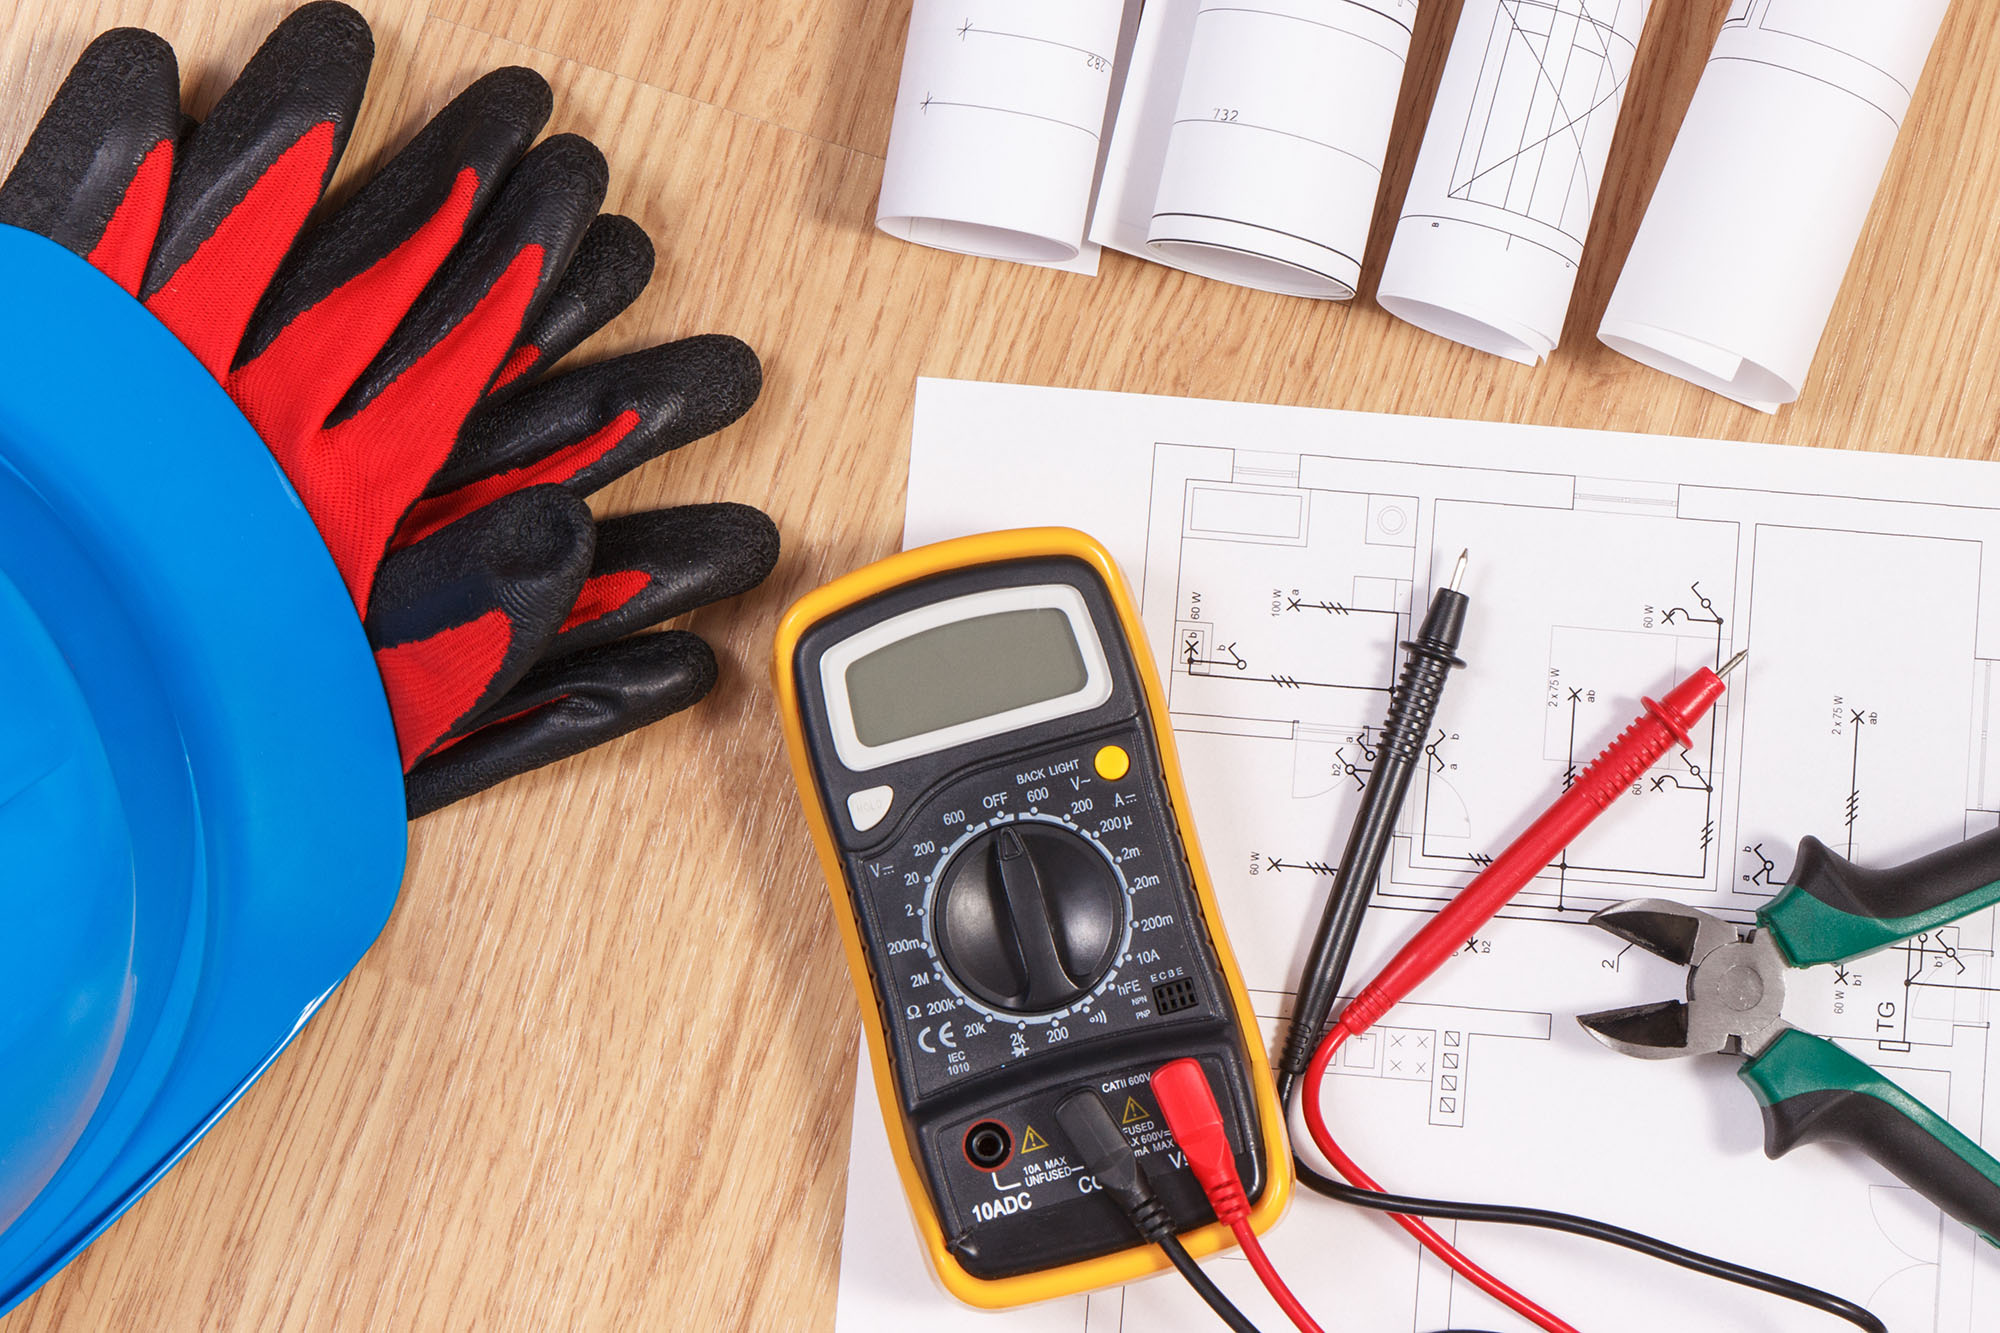 Electrical drawings, multimeter for measurement in electrical installation and accessories for engineer jobs